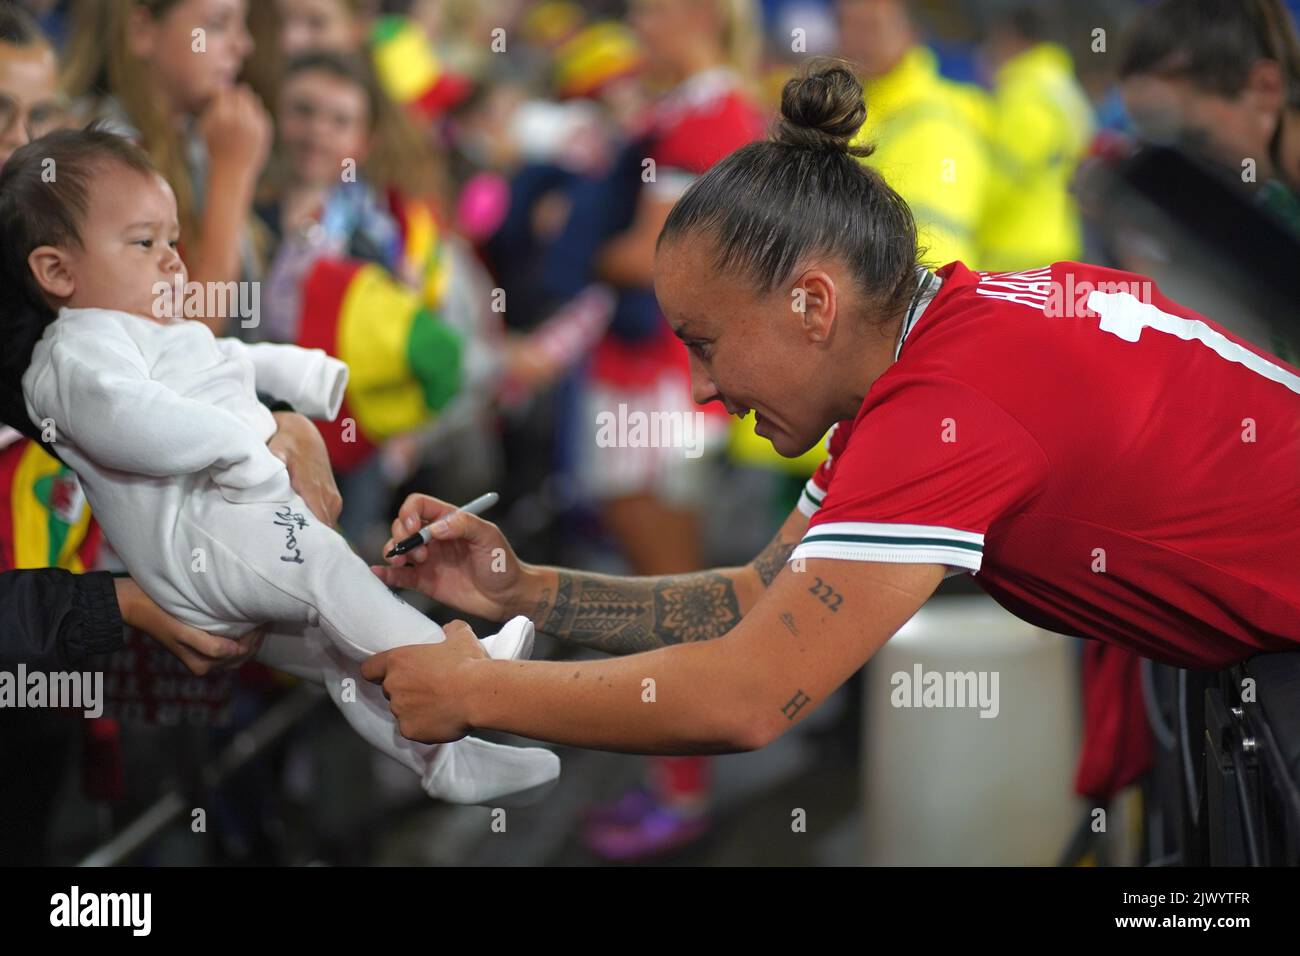 Cardiff, Wales, UK. 6th September, 2022. Natasha Harding autographs a baby as Wales Women Football Team celebrate a nil-nil draw against Slovenia to qualify for the World Cup Play offs. Cardiff City STadium, Cardiff. Credit: Penallta Photographics/Alamy Live News Stock Photo